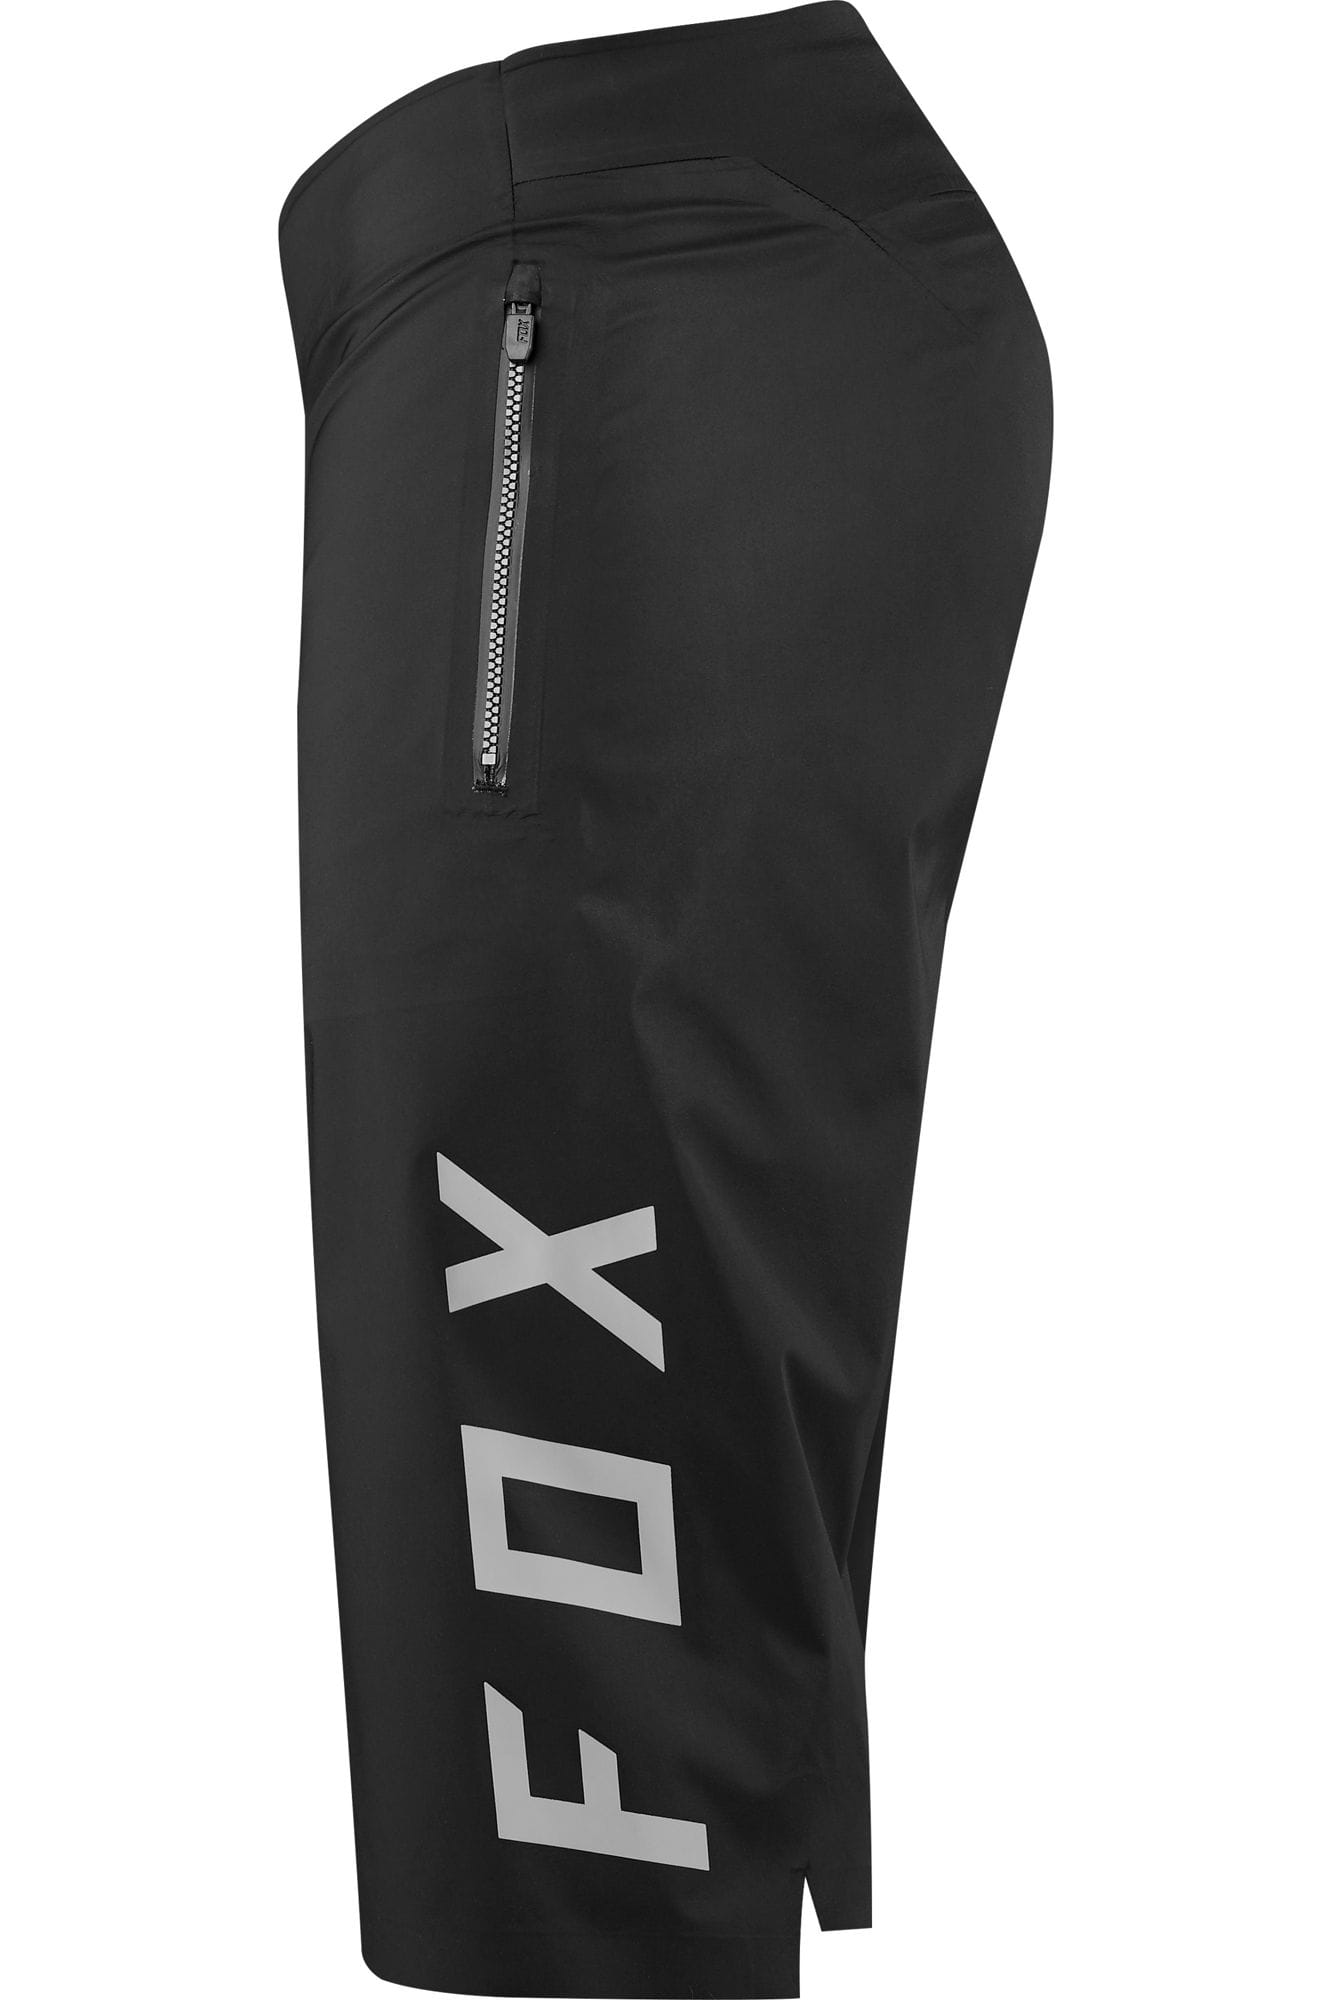 FOX DEFEND PRO WATER SHORTS